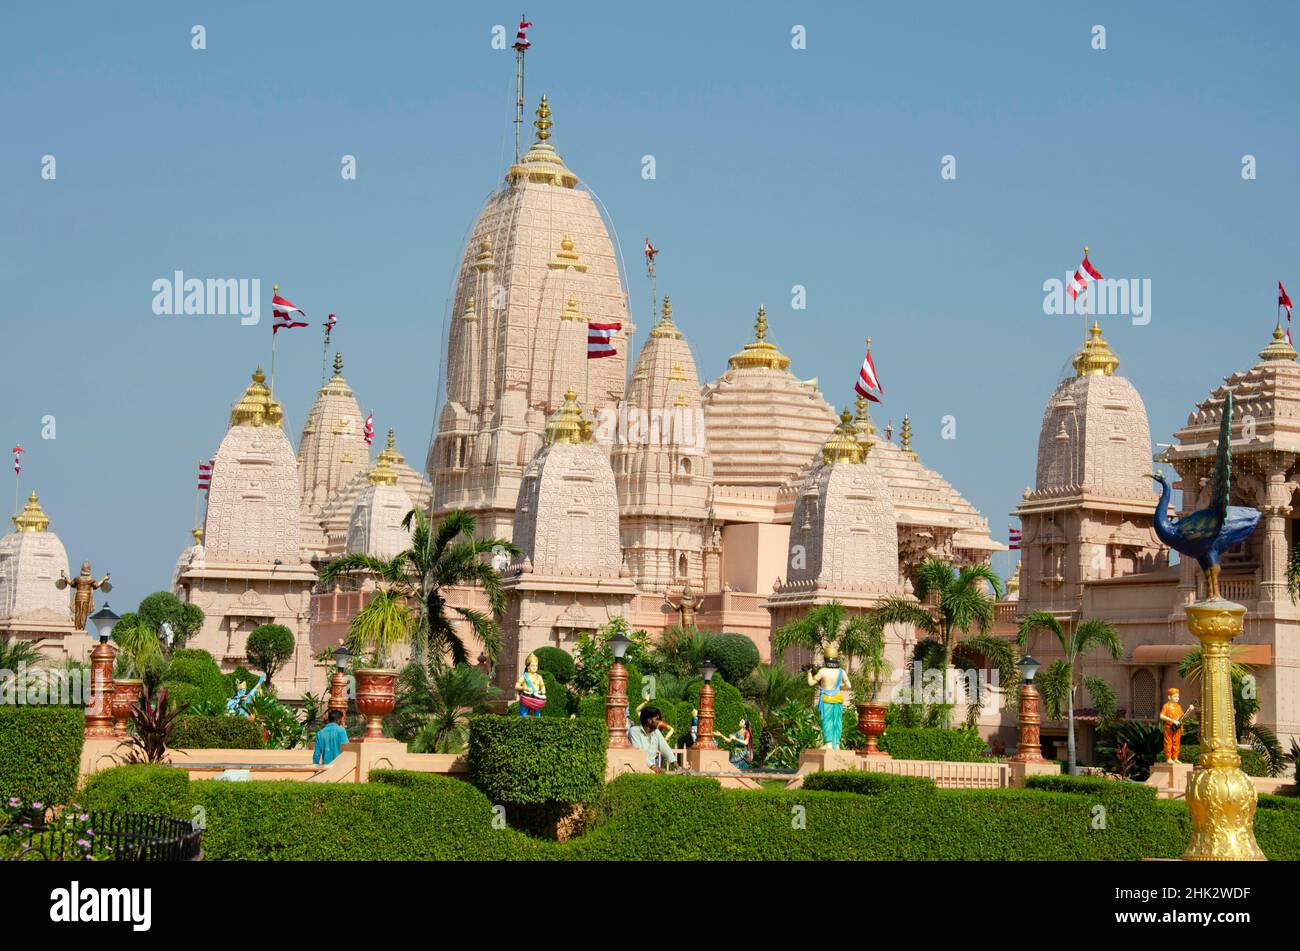 Nilkanthdham, Swaminarayan temple an extensive religious complex with pagodas, fountains, statues & carved idols and gates, located at Poicha, Gujarat Stock Photo